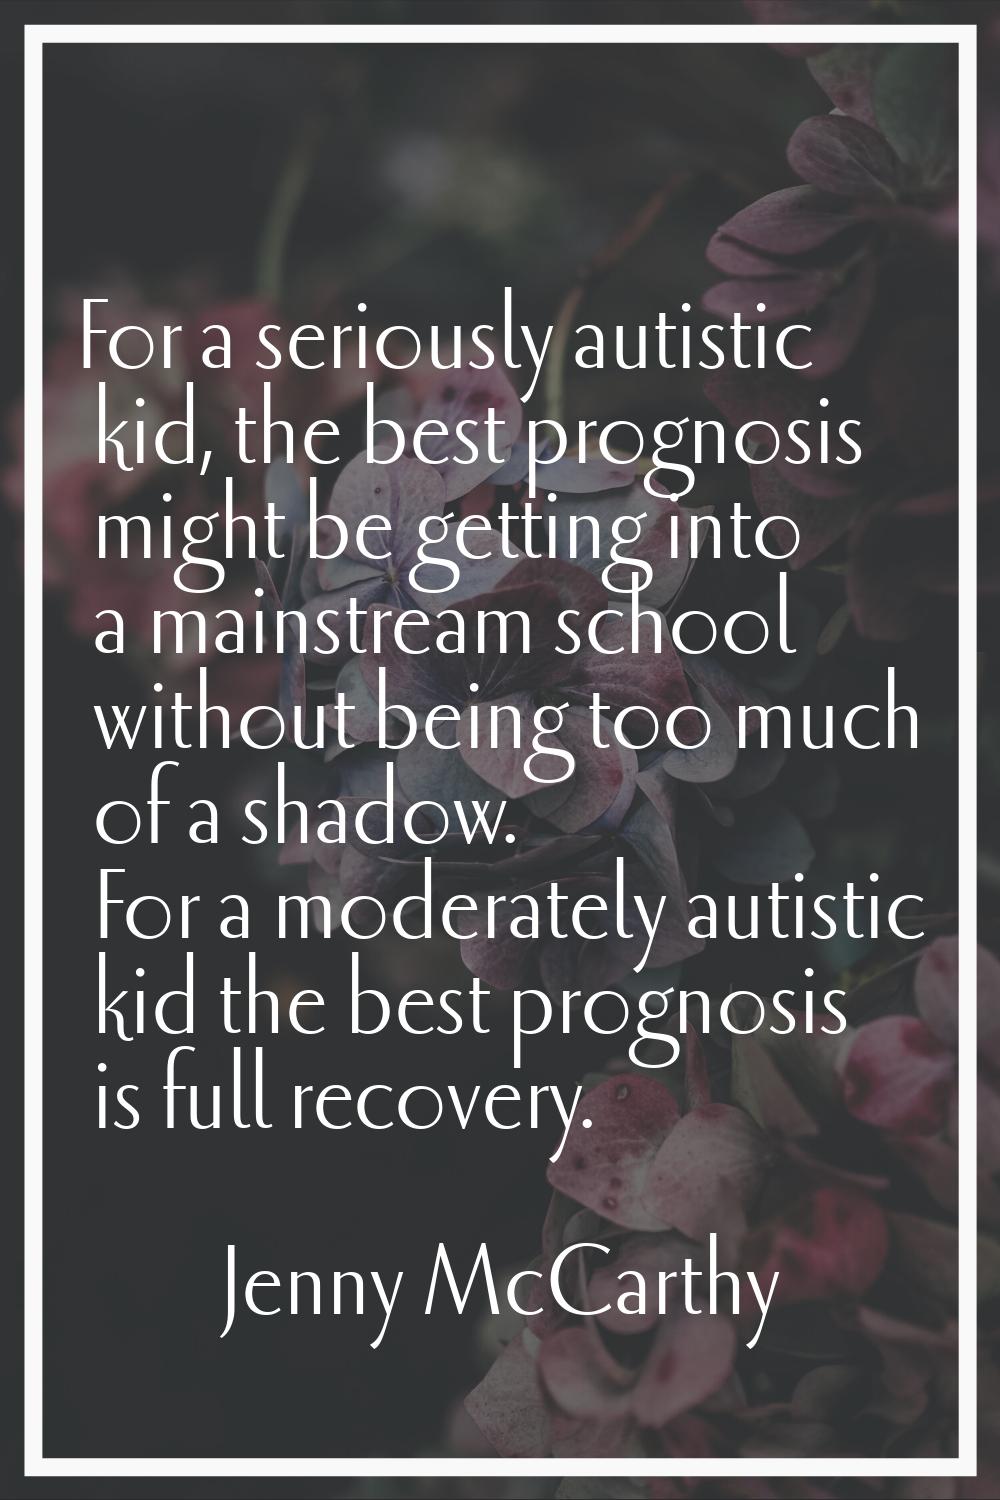 For a seriously autistic kid, the best prognosis might be getting into a mainstream school without 